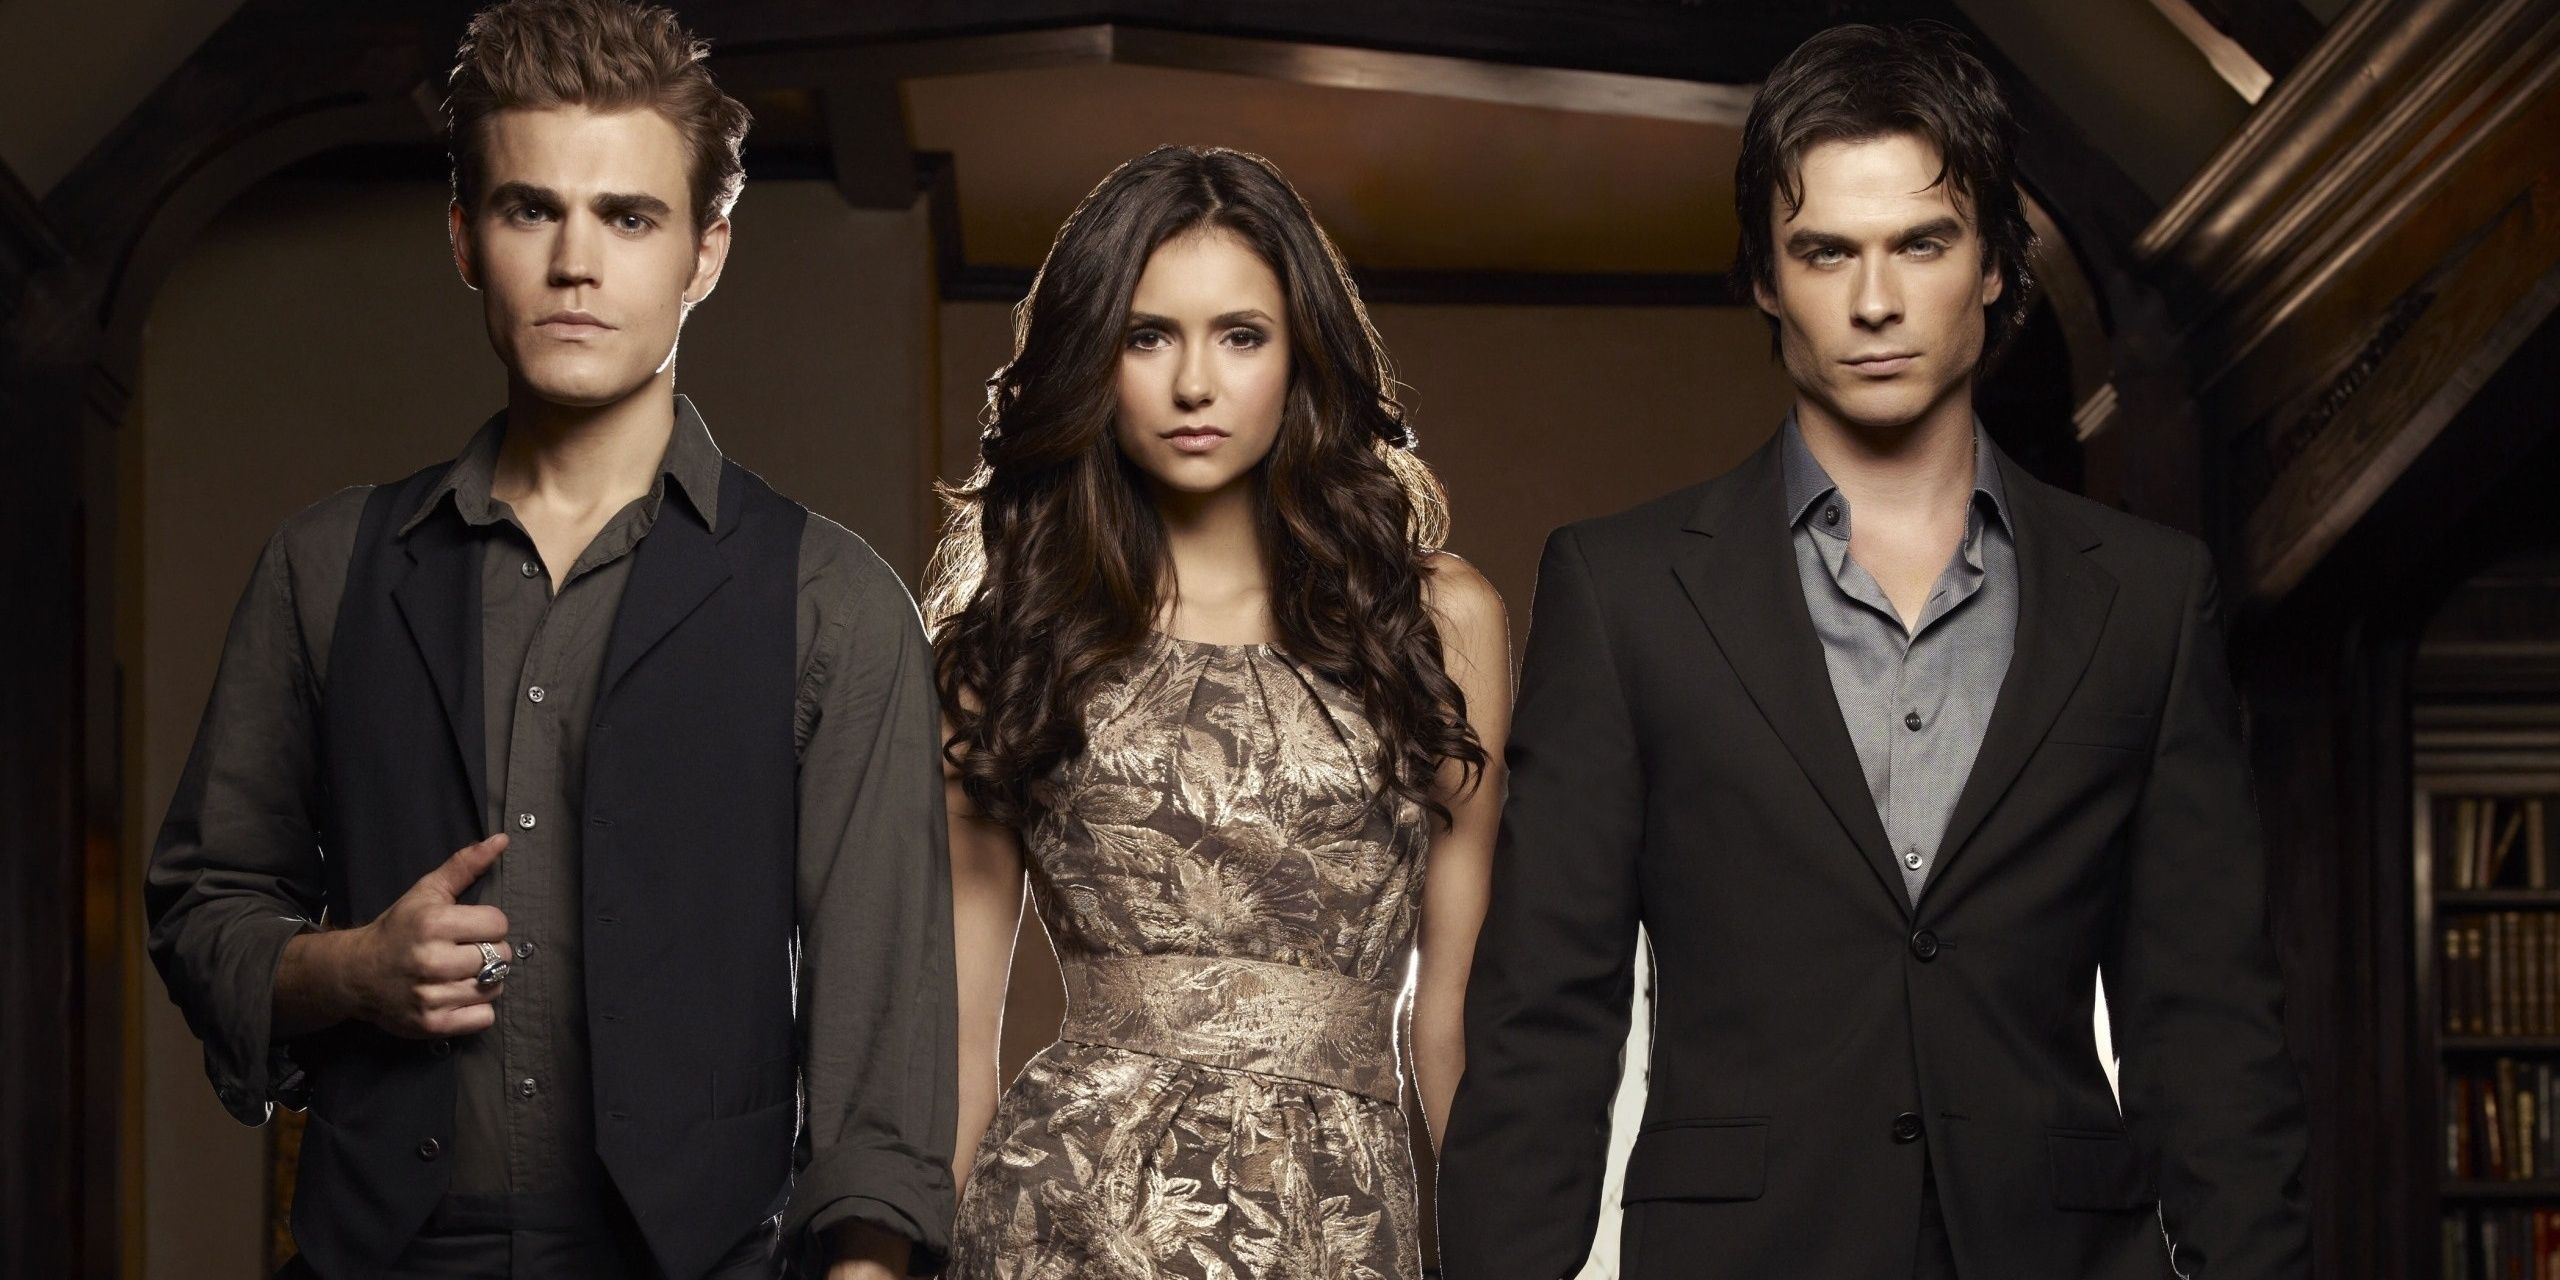 Stefan, Elena, and Damon in a promo image for The Vampire Diaries